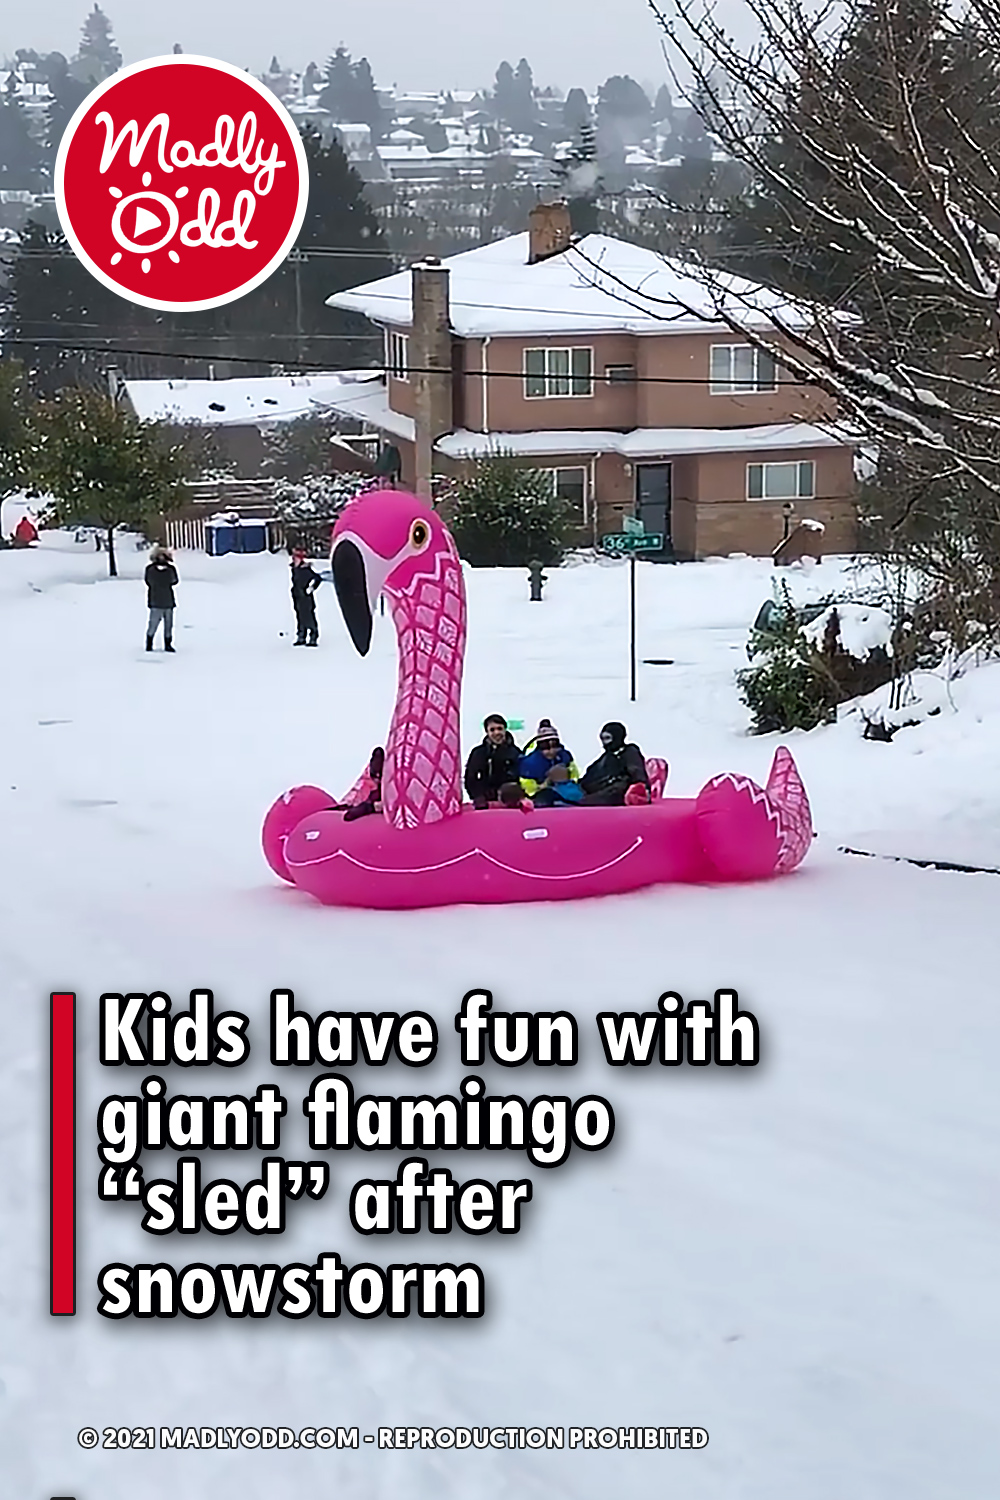 Kids have fun with giant flamingo “sled” after snowstorm